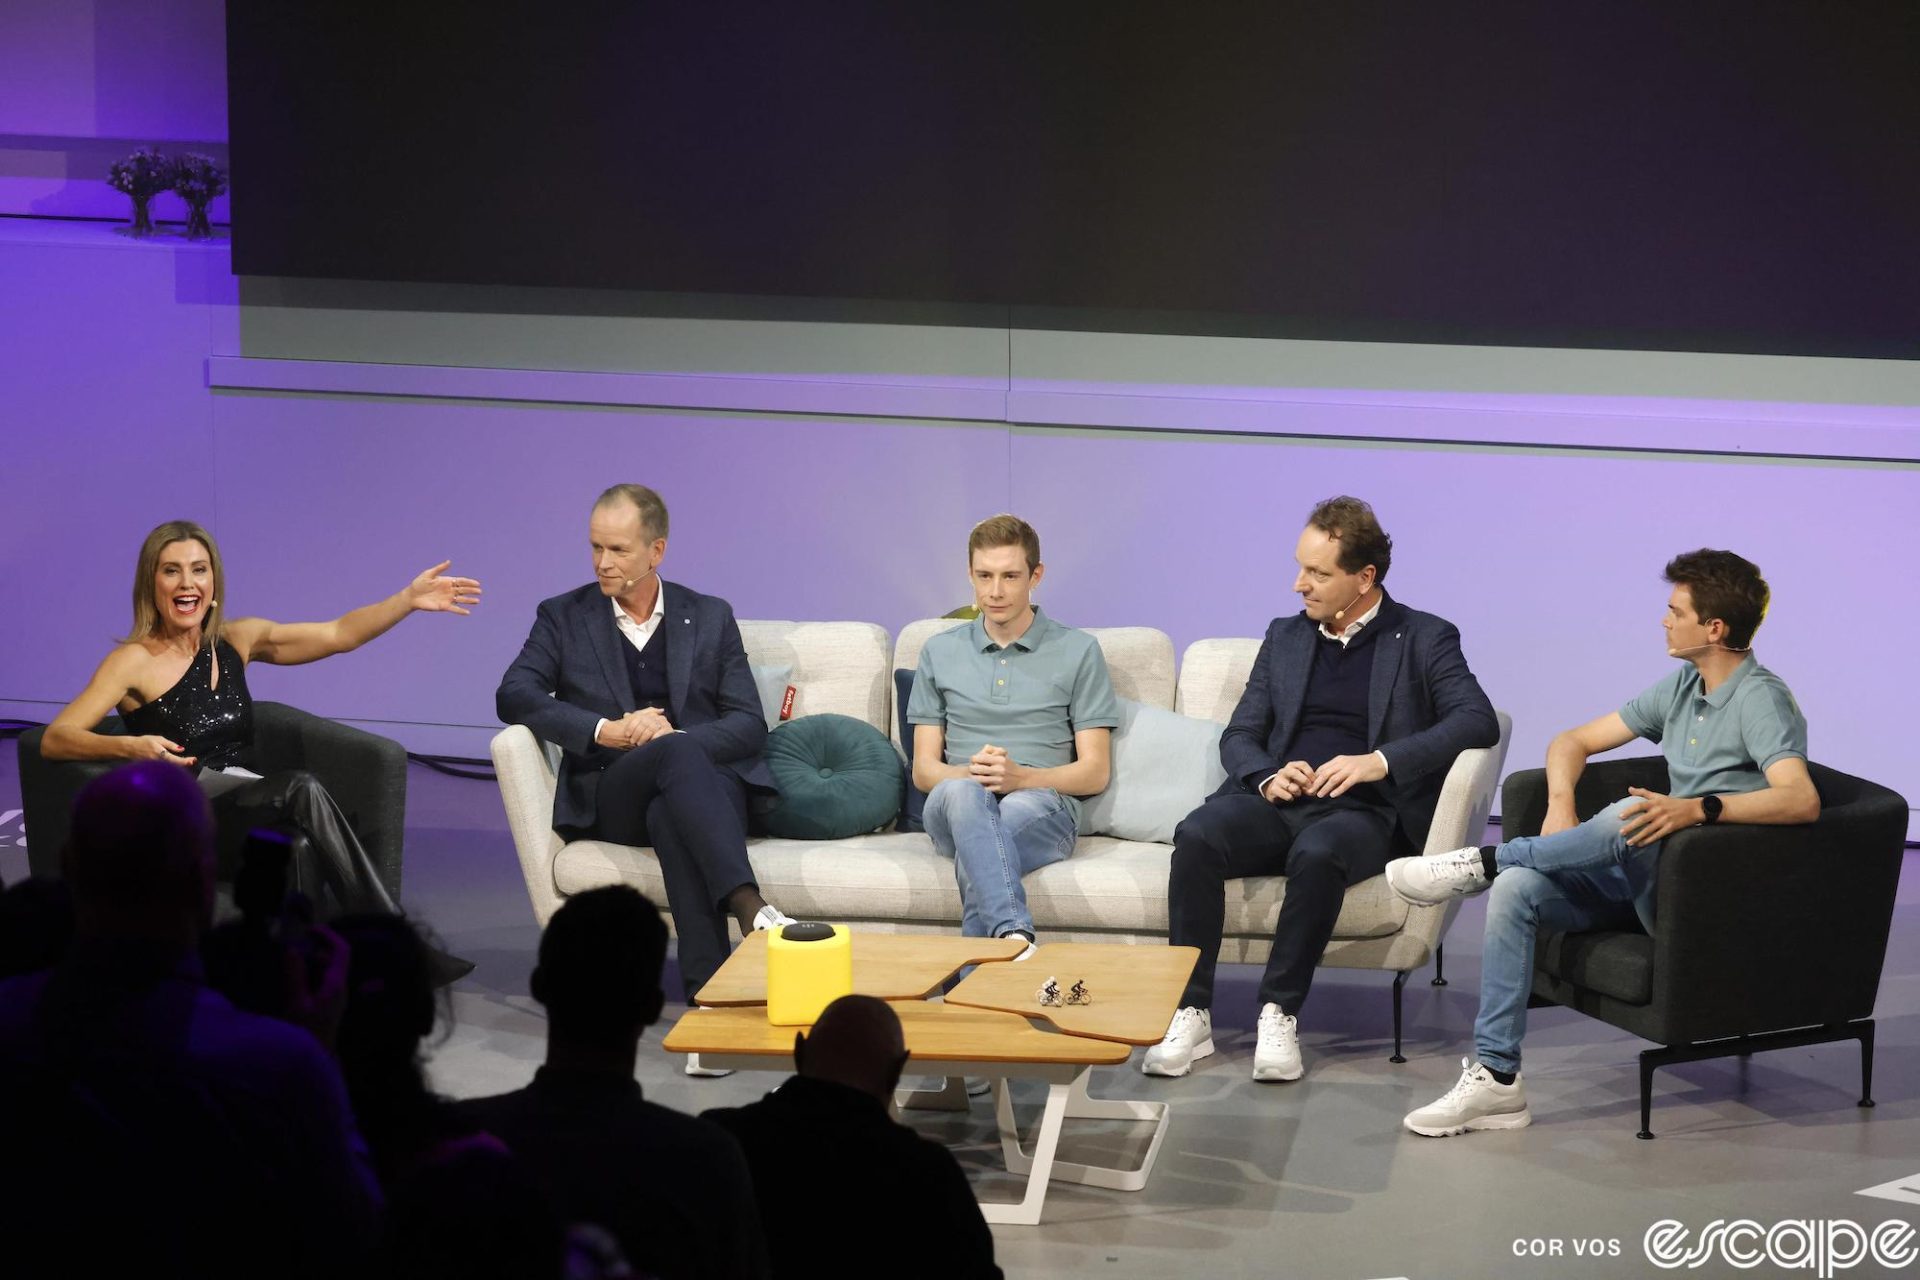 From left to right, Orla Chennaoui, Richard Plugge, Jonas Vingegaard, Merijn Zeeman, and Sepp Kuss sit on chairs and a sofa for a discussion during the Visma team presentation. Kuss looks more relaxed than Jonas, sitting with his left leg crossed over his right, while Jonas' slight frame appears to shrink into the couch slightly.